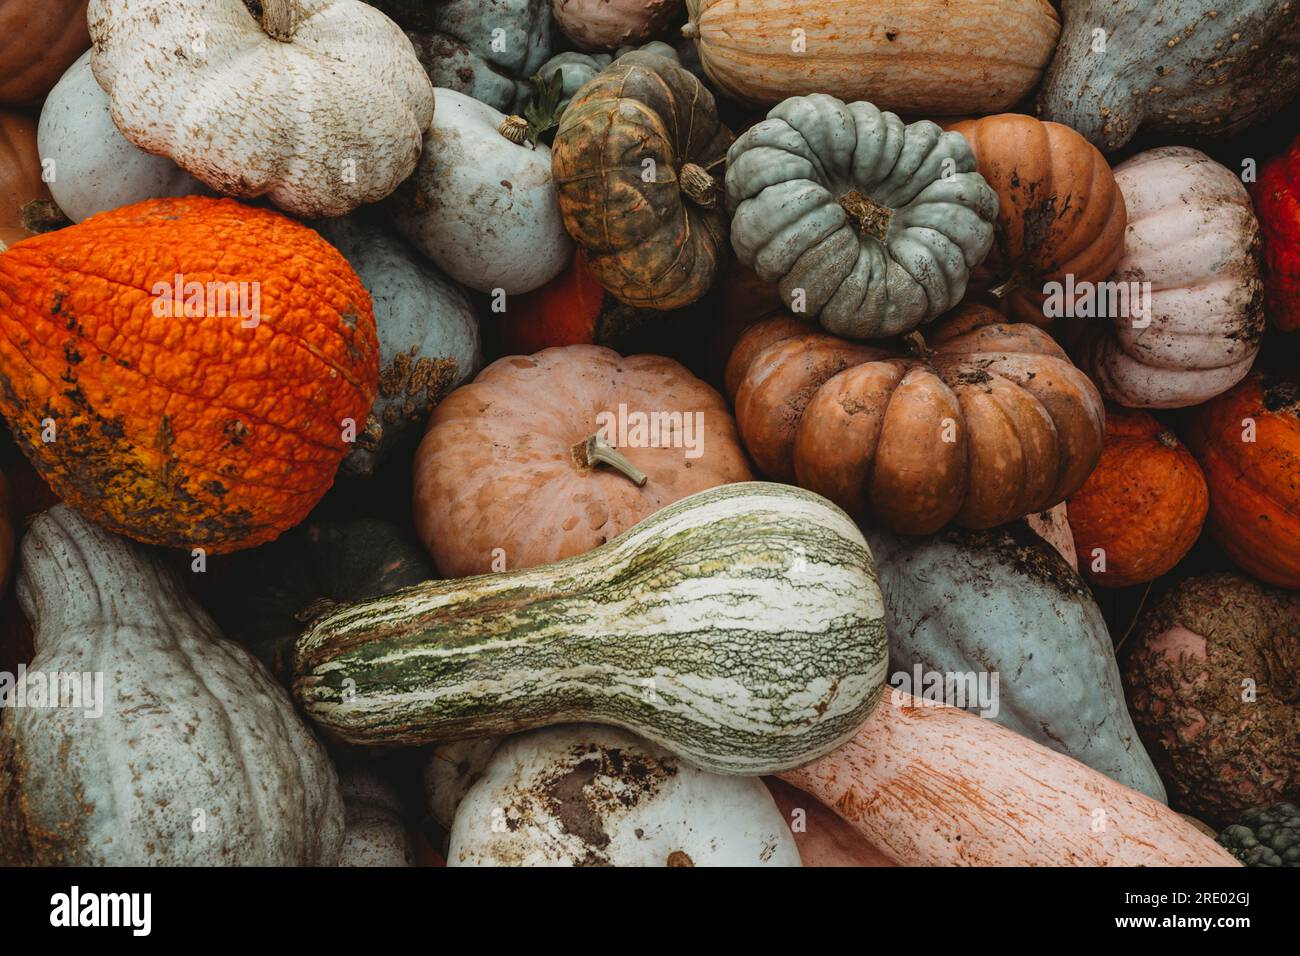 Pumpkins and Gourds Fall Harvest Stock Photo